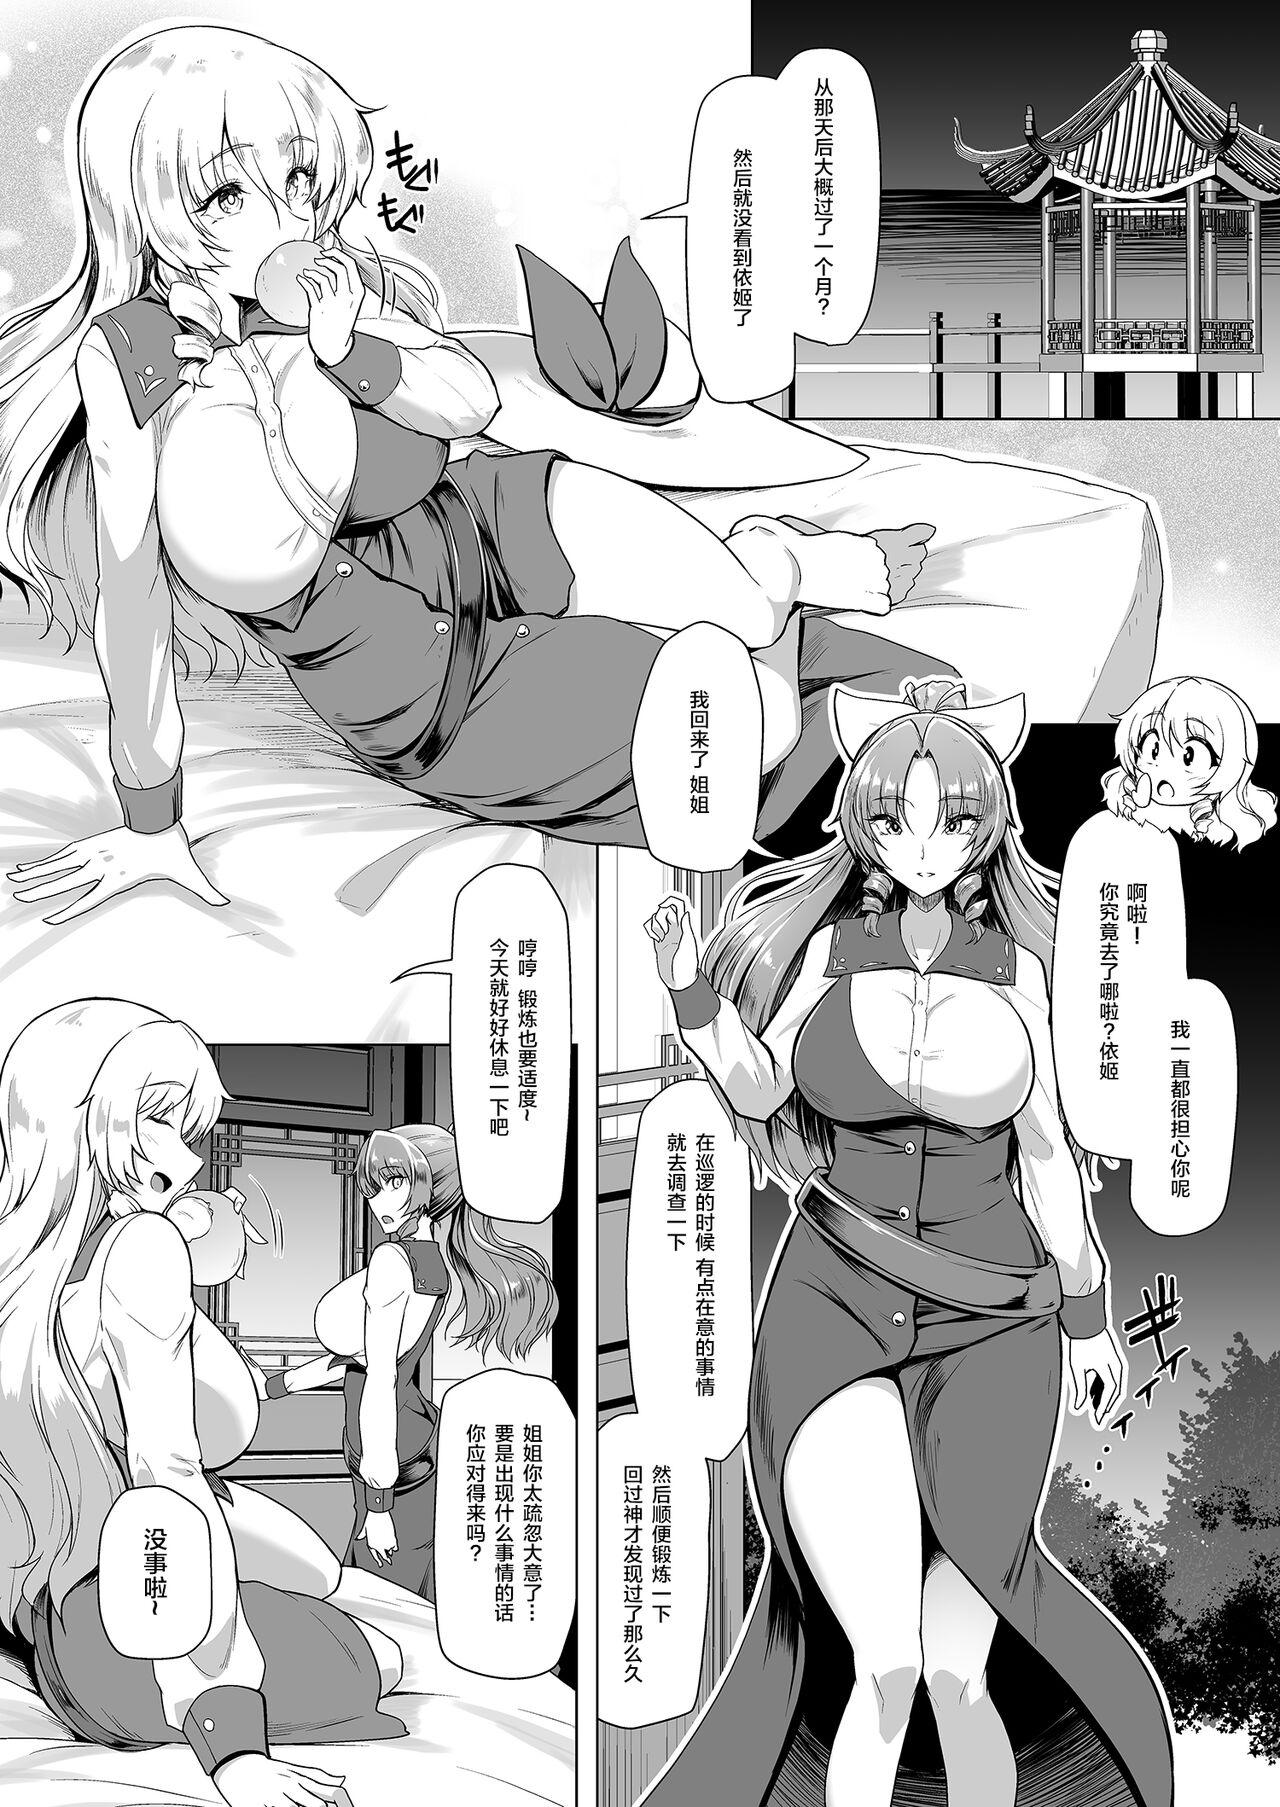 Fit Taimamiko Yorihime 3 - Touhou project Gangbang - Page 6